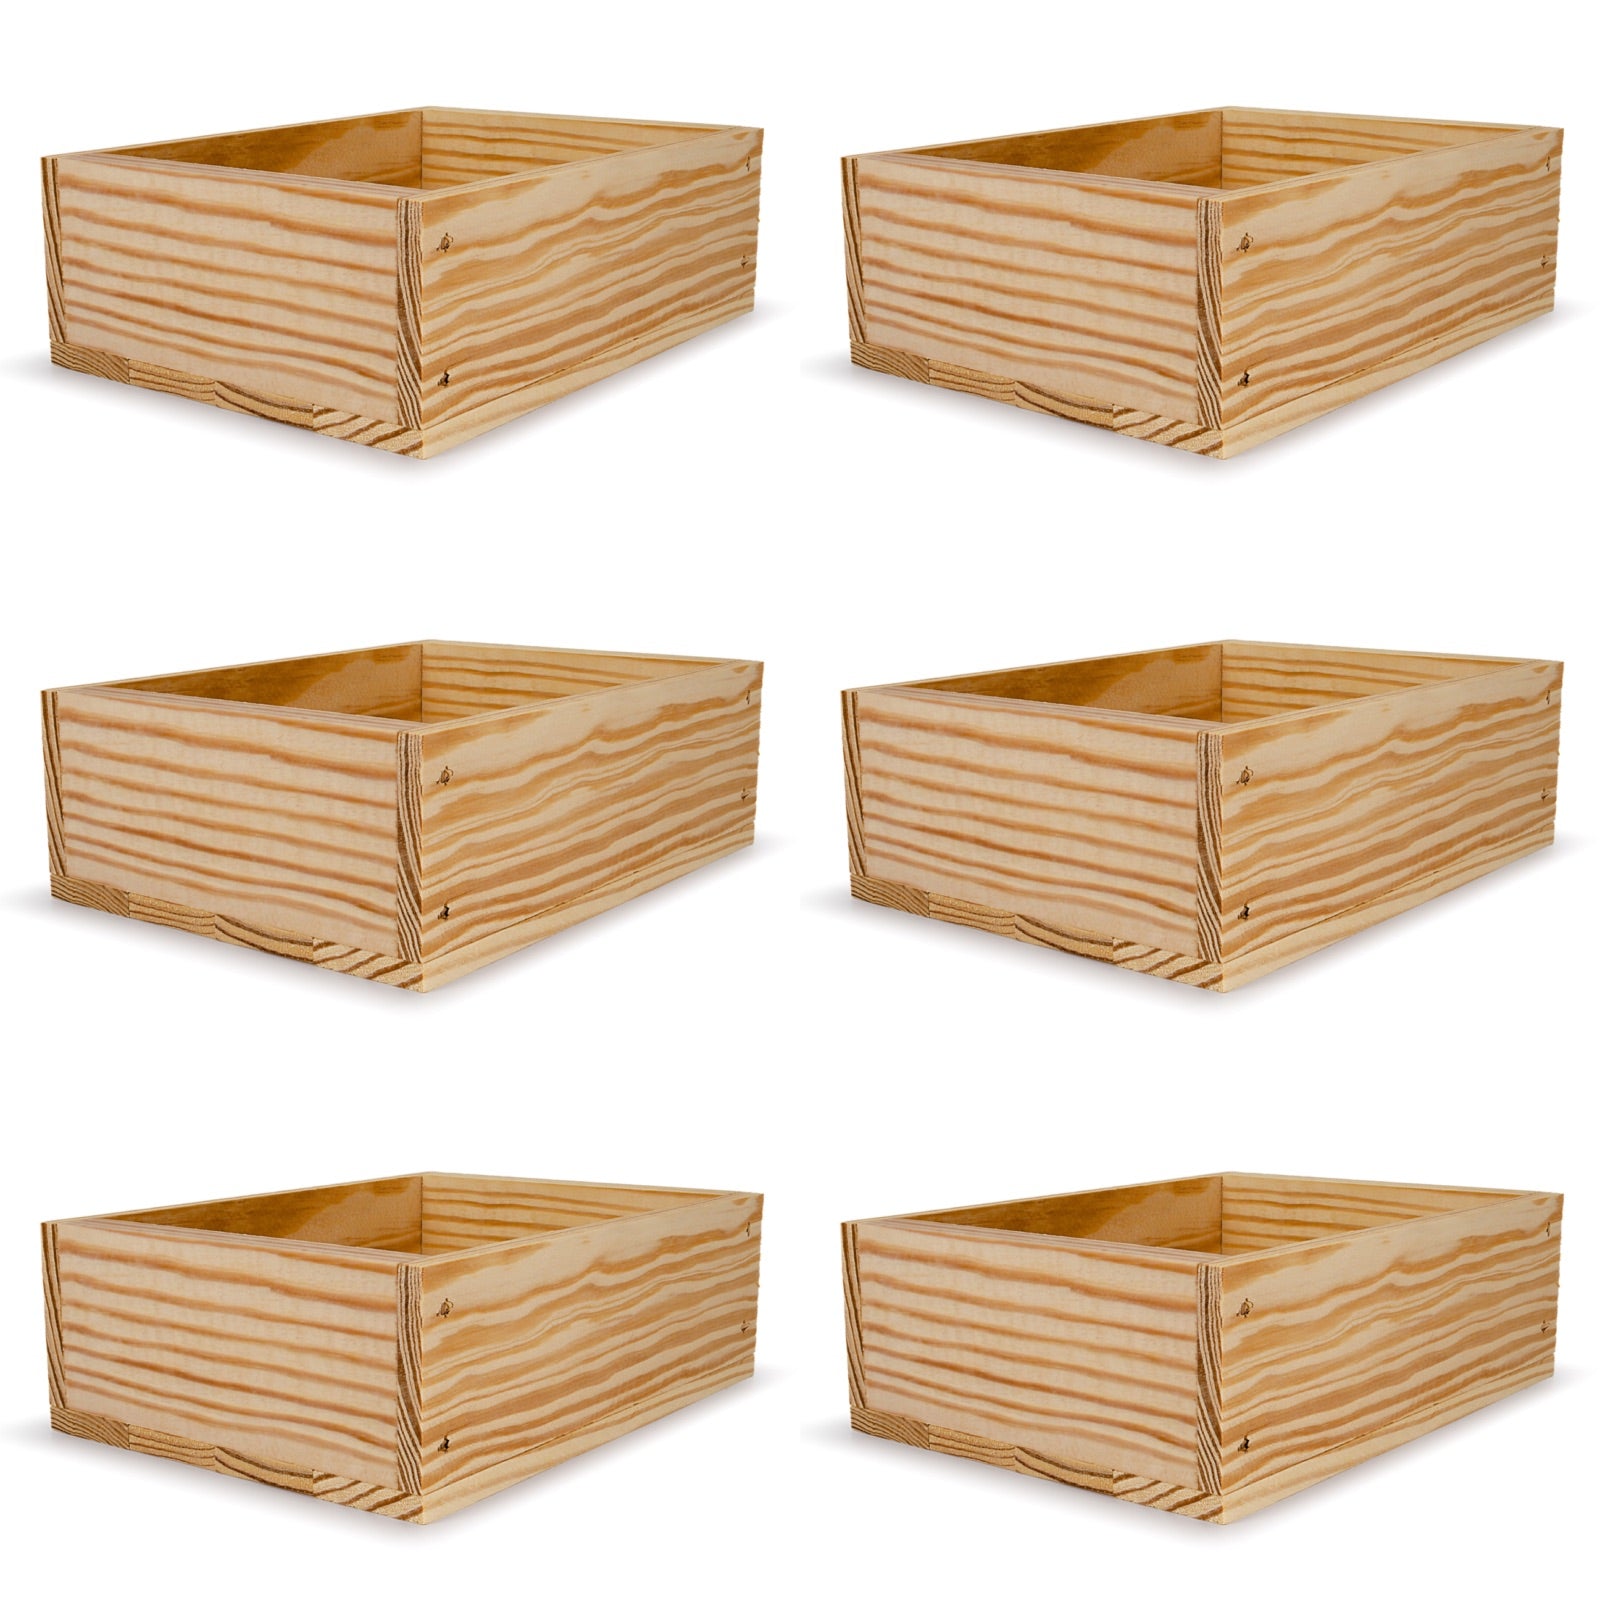 6 Small wooden crates 8x6.25x2.75